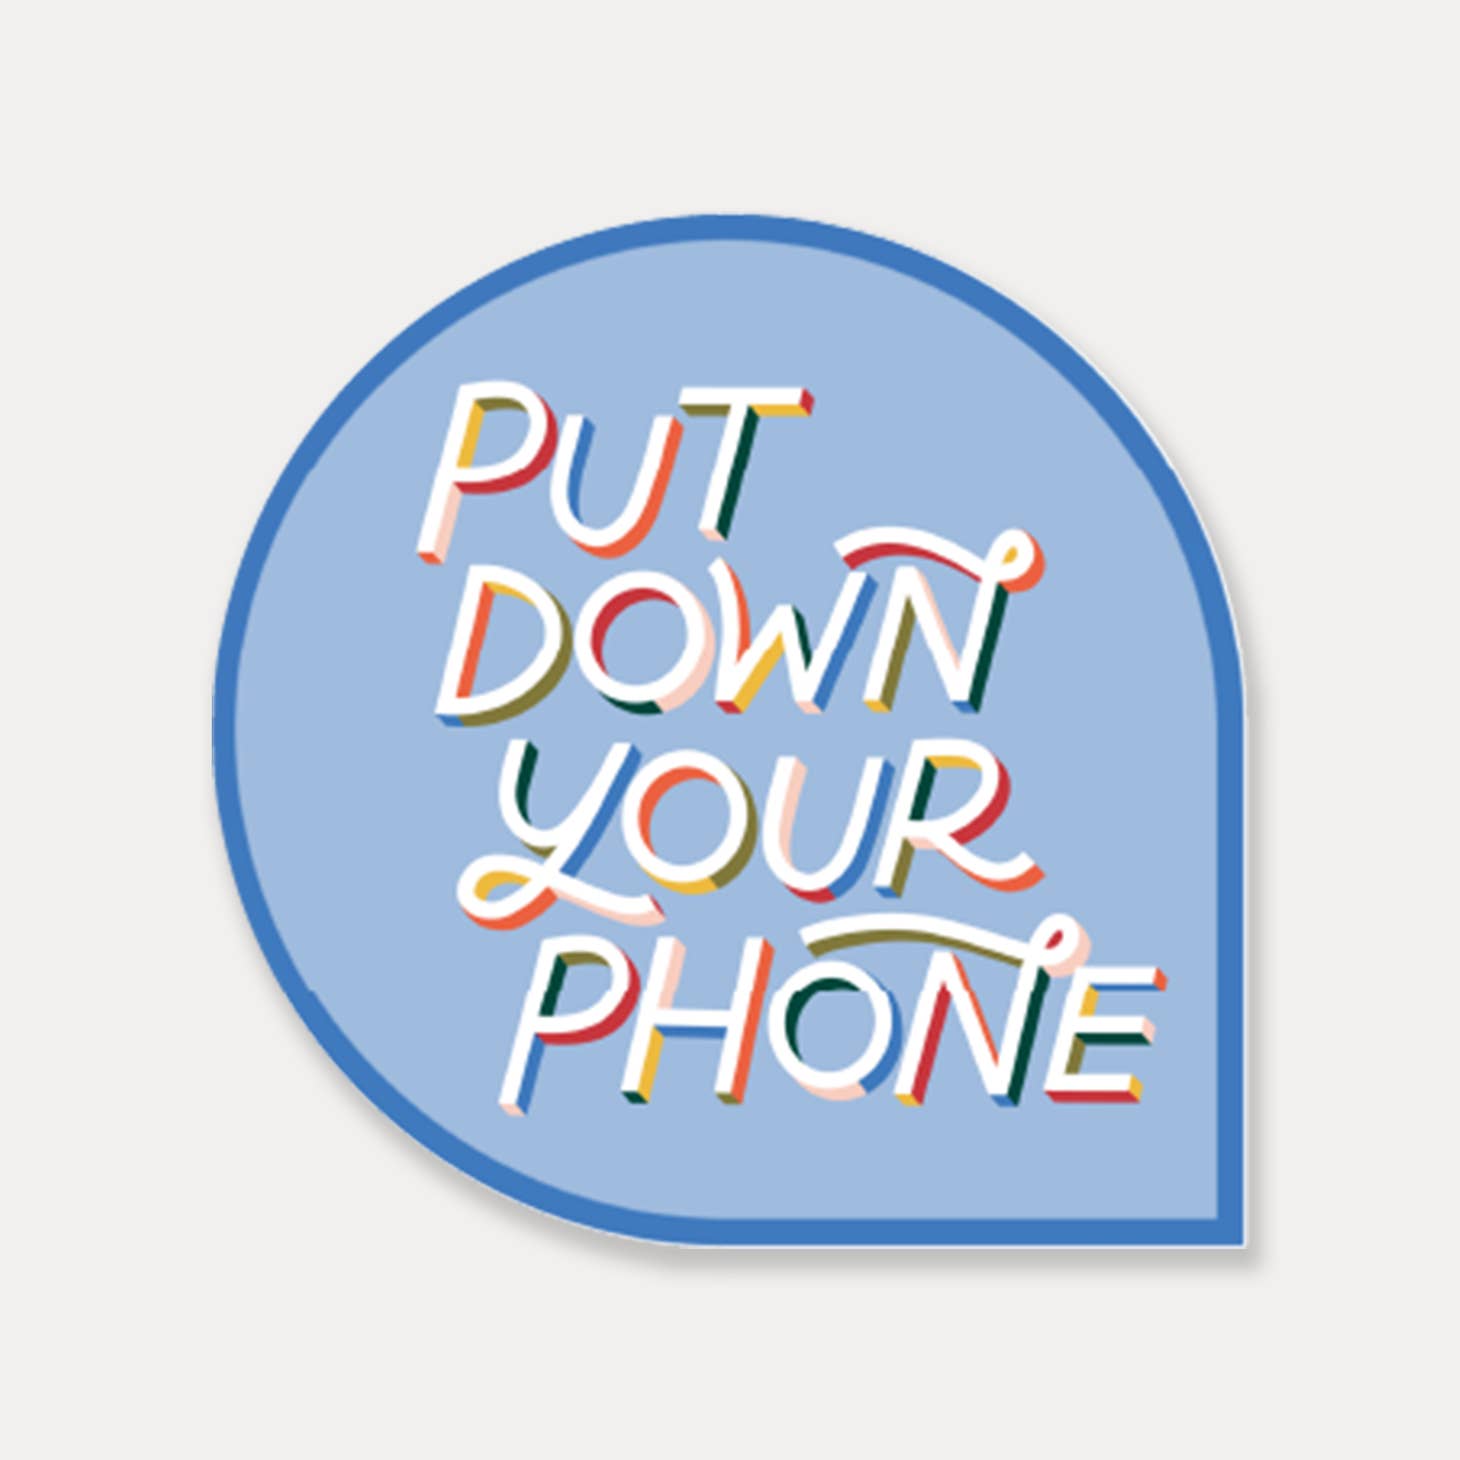 Image of teardrop shaped sticker with light blue background and dark blue border with white text says, "Put down your phone". 